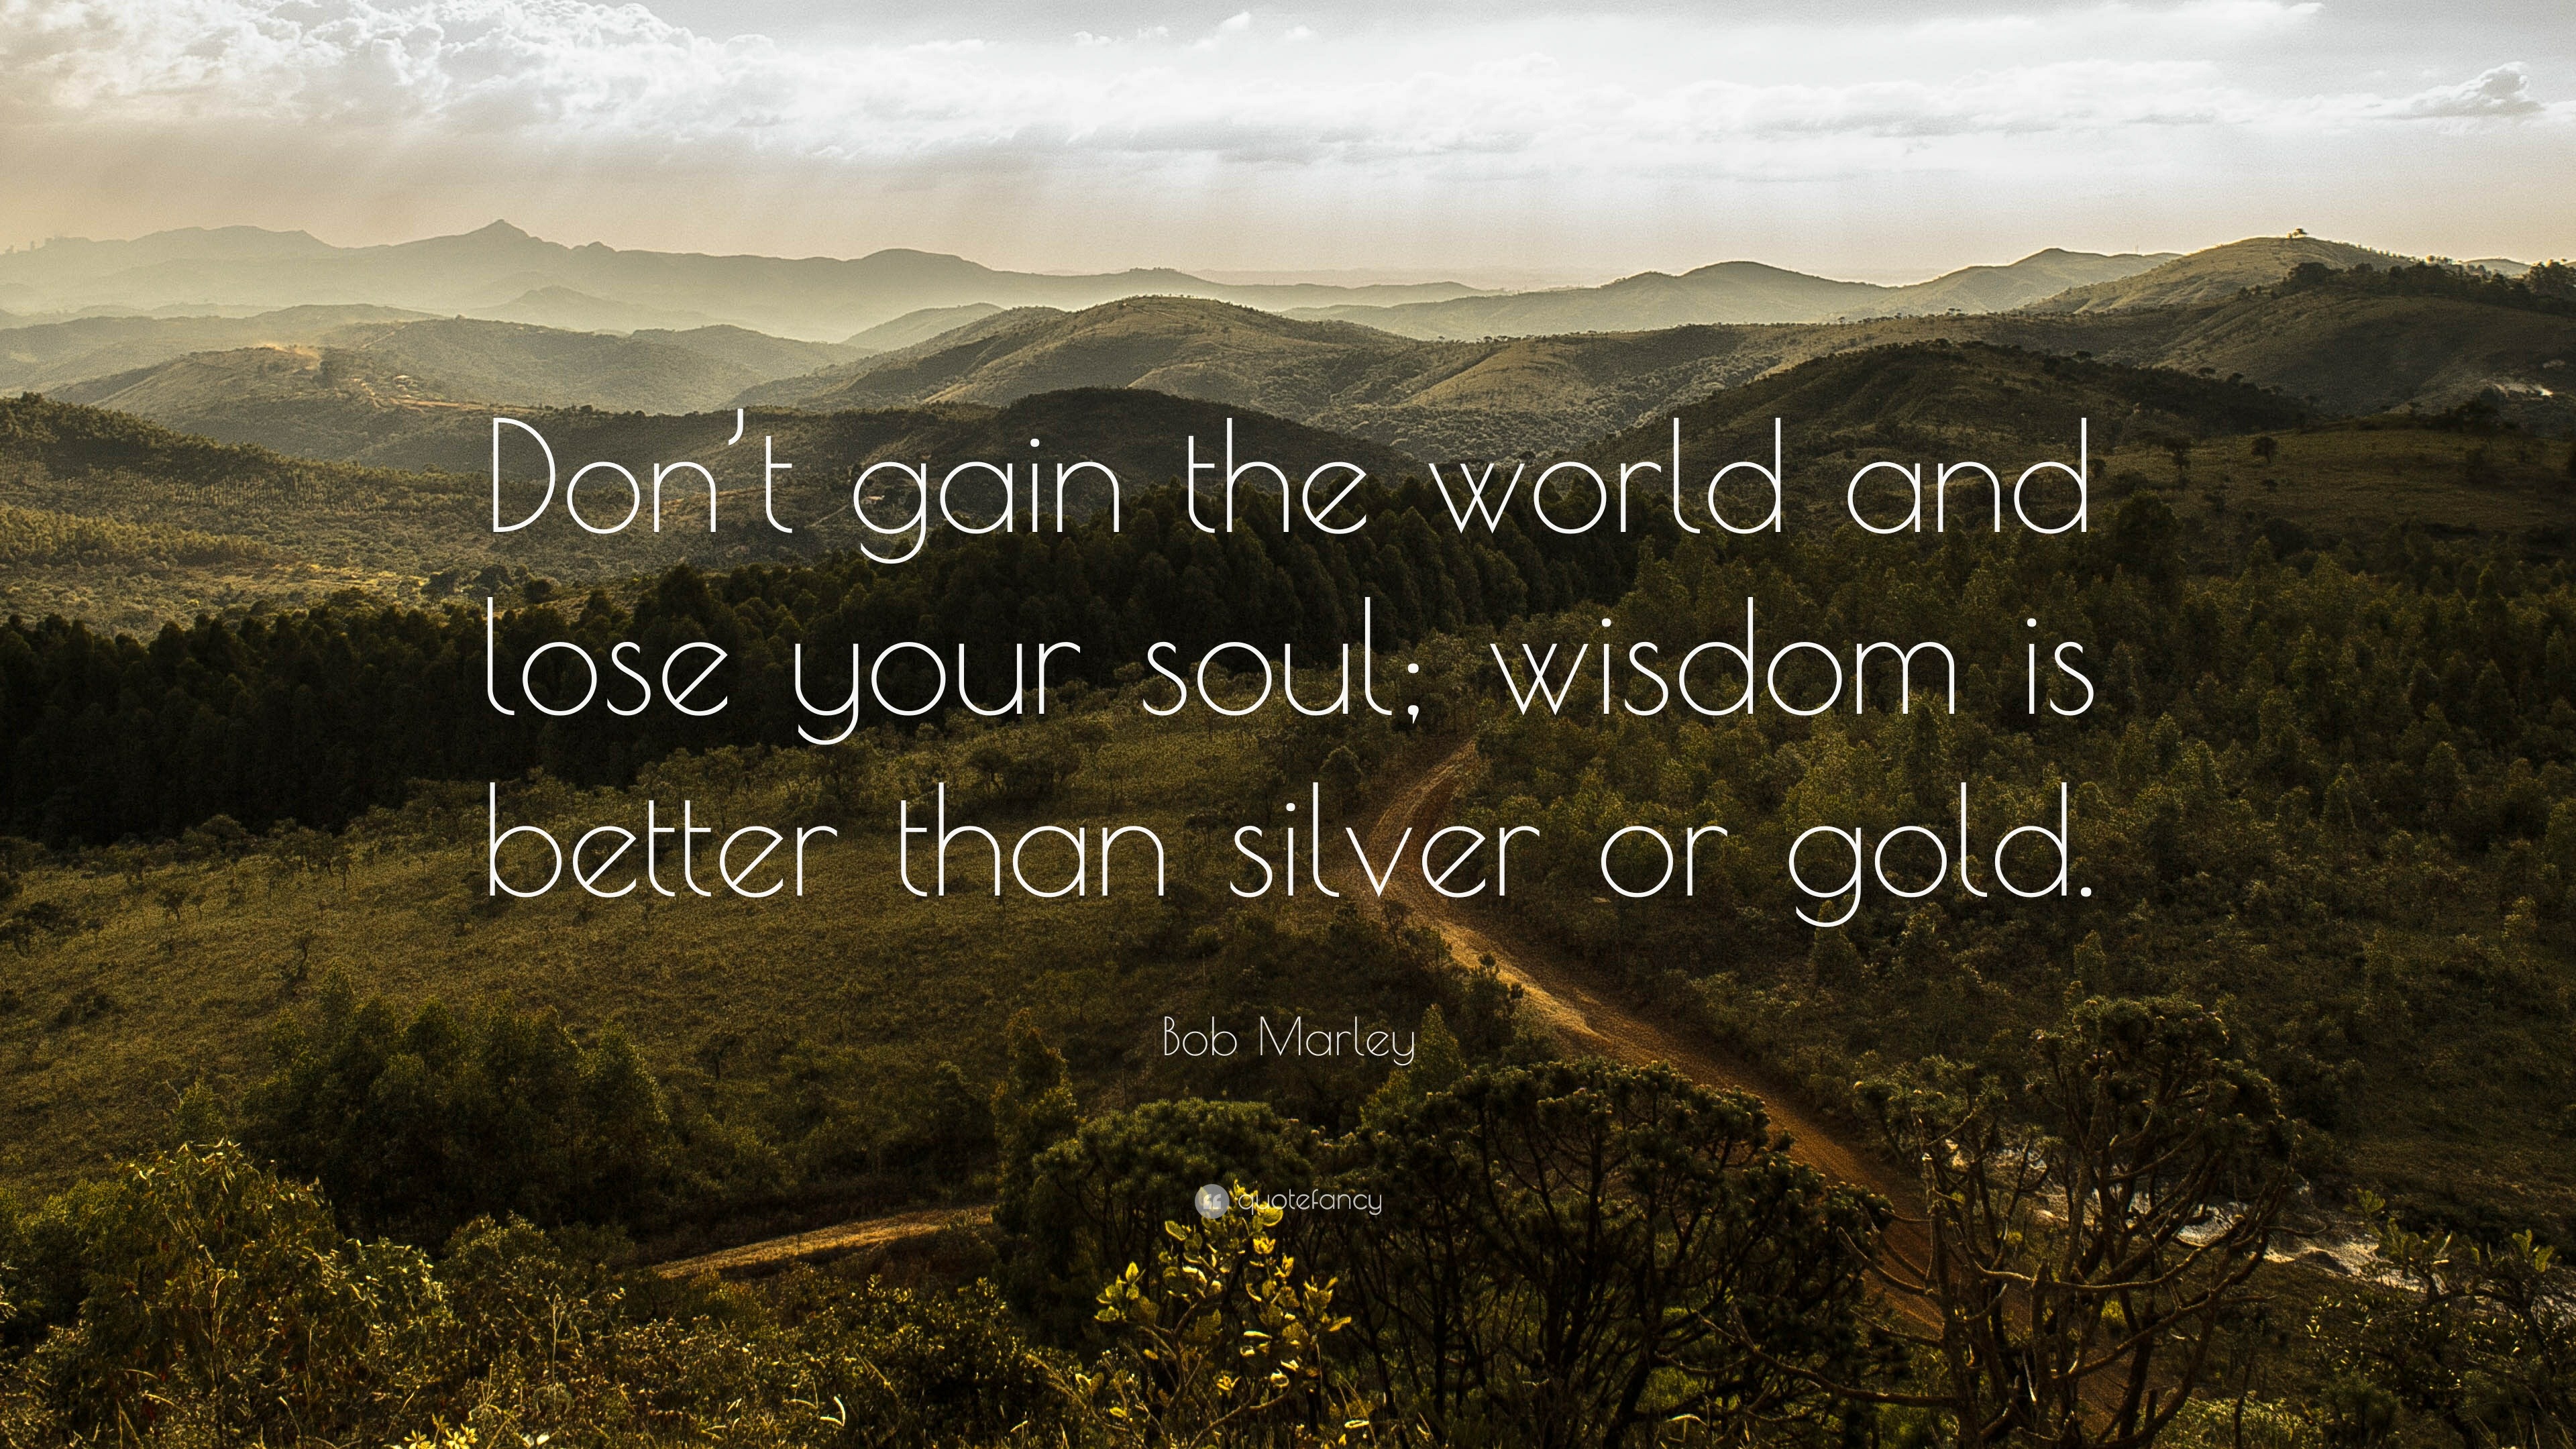 Don't gain the world and lose your soul. Wisdom is better than